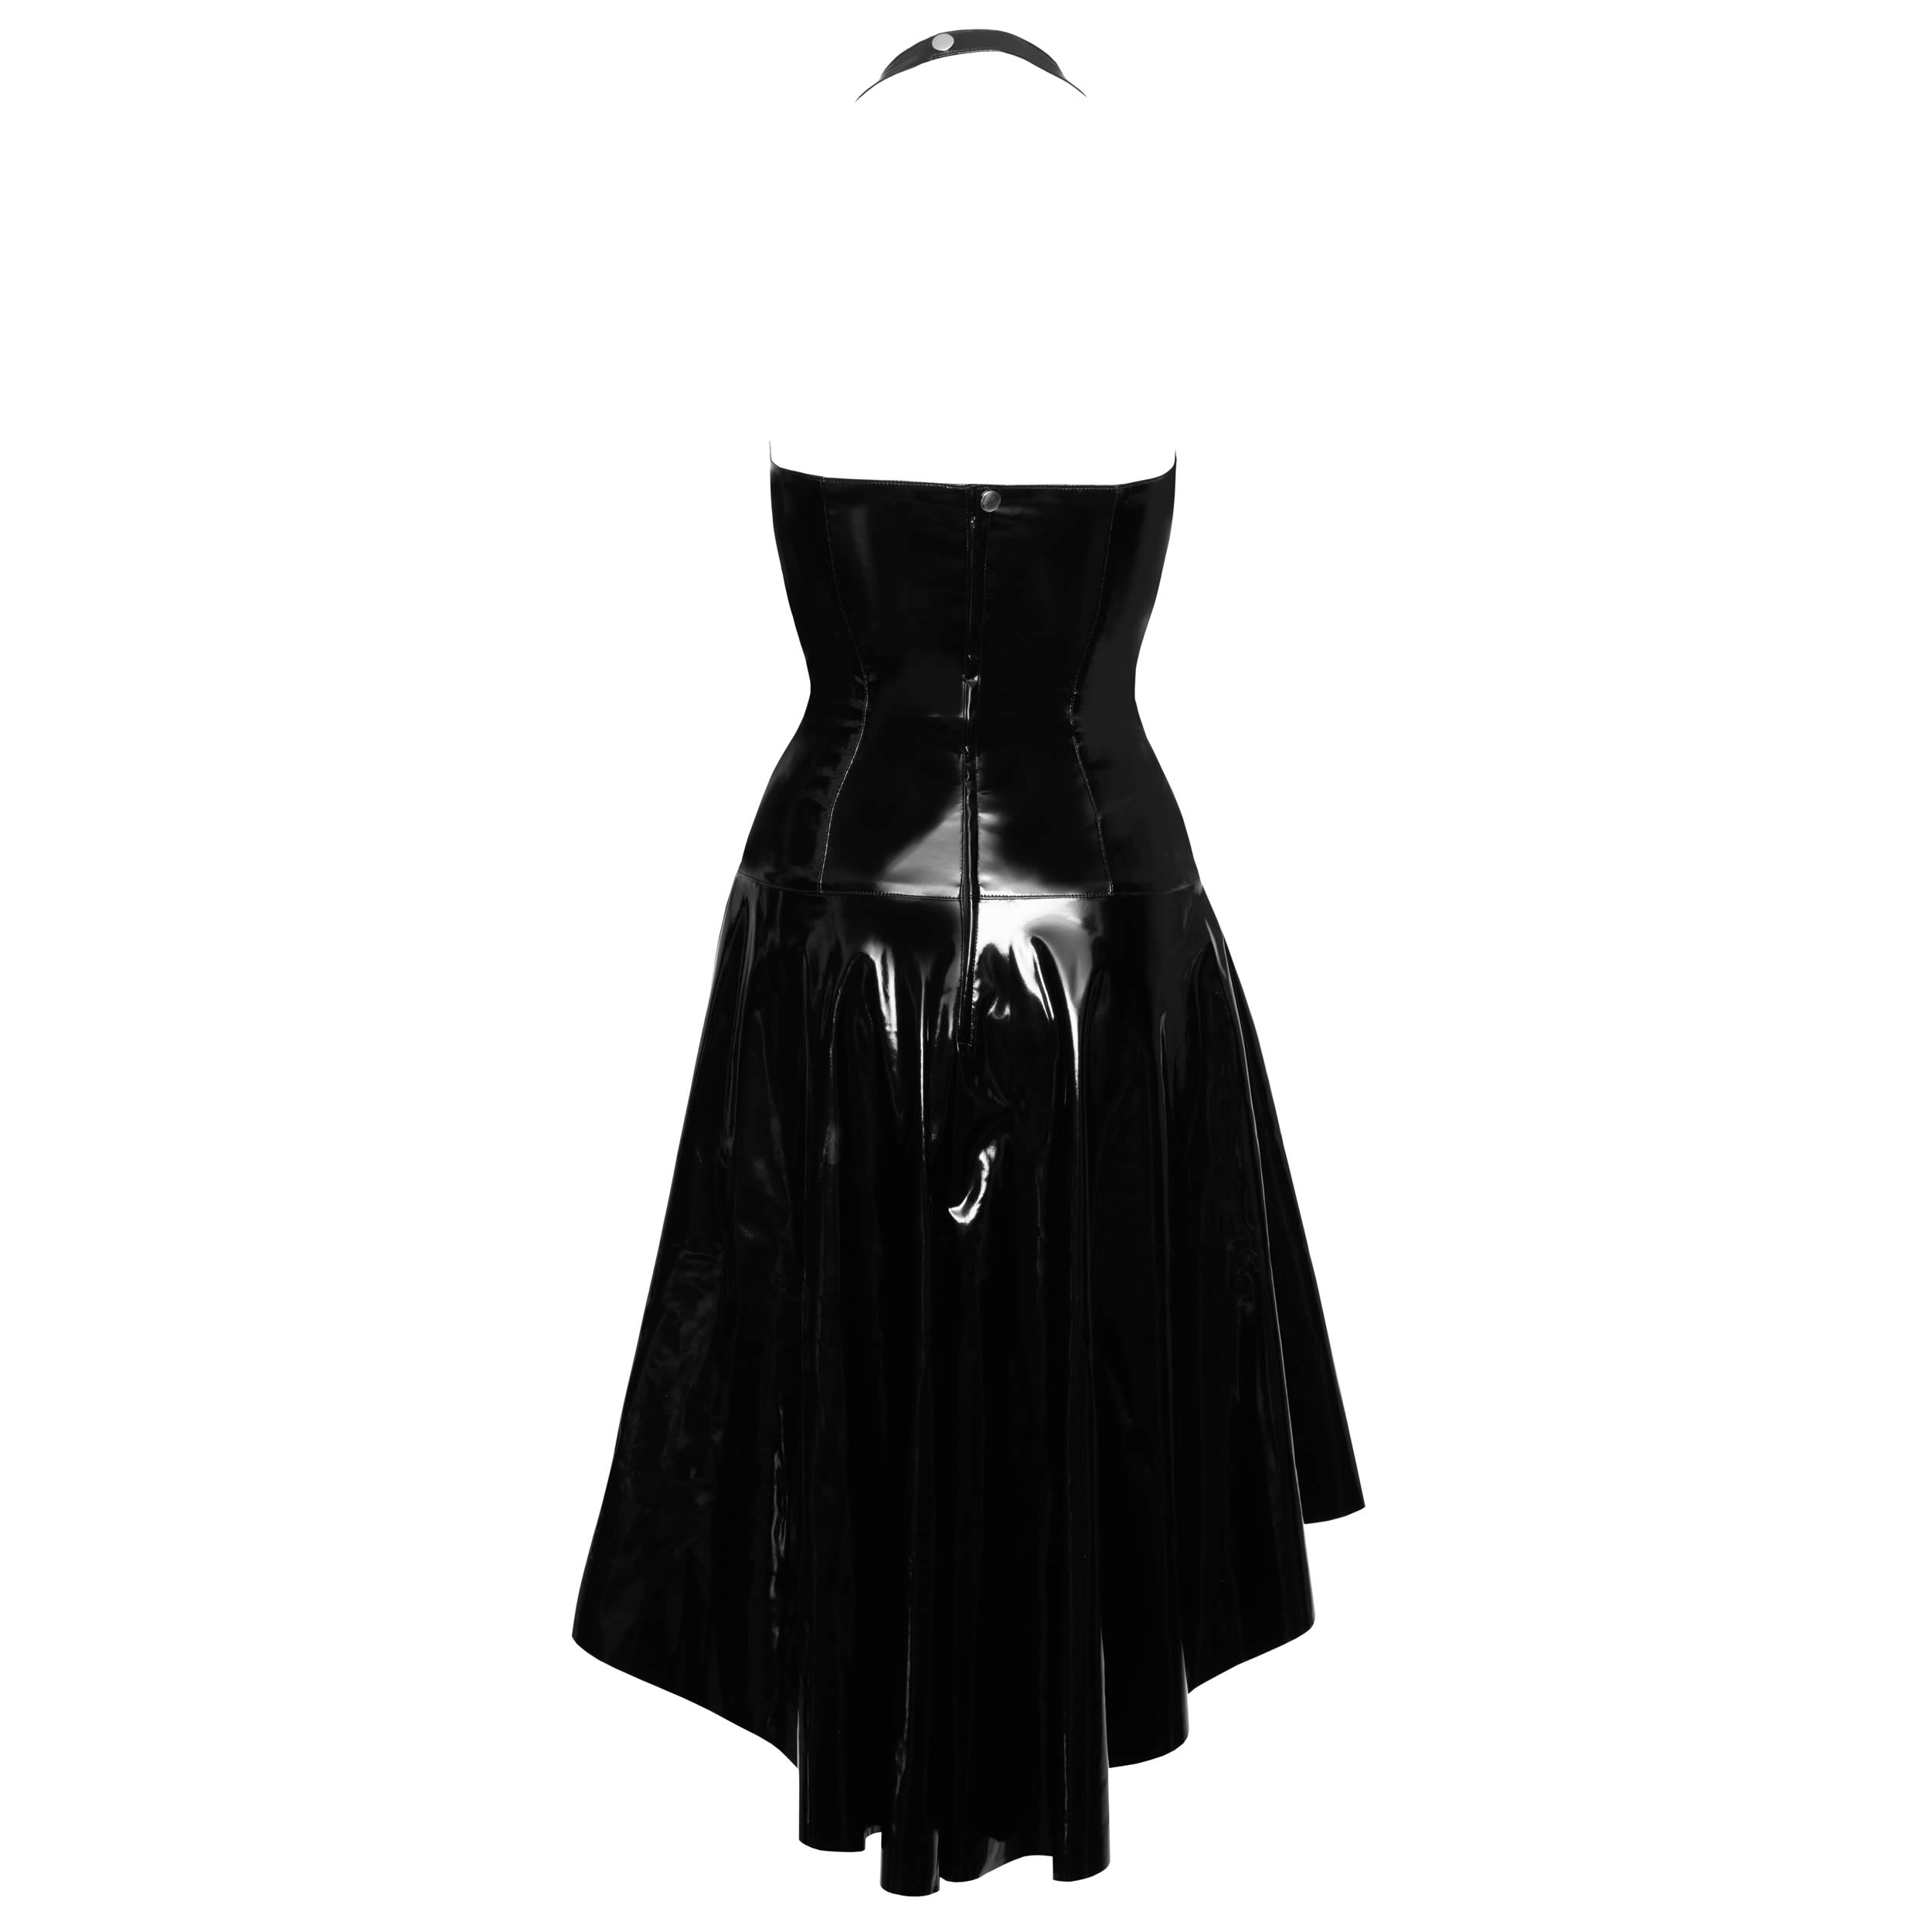 Vinyl dress with laced cleavage in black